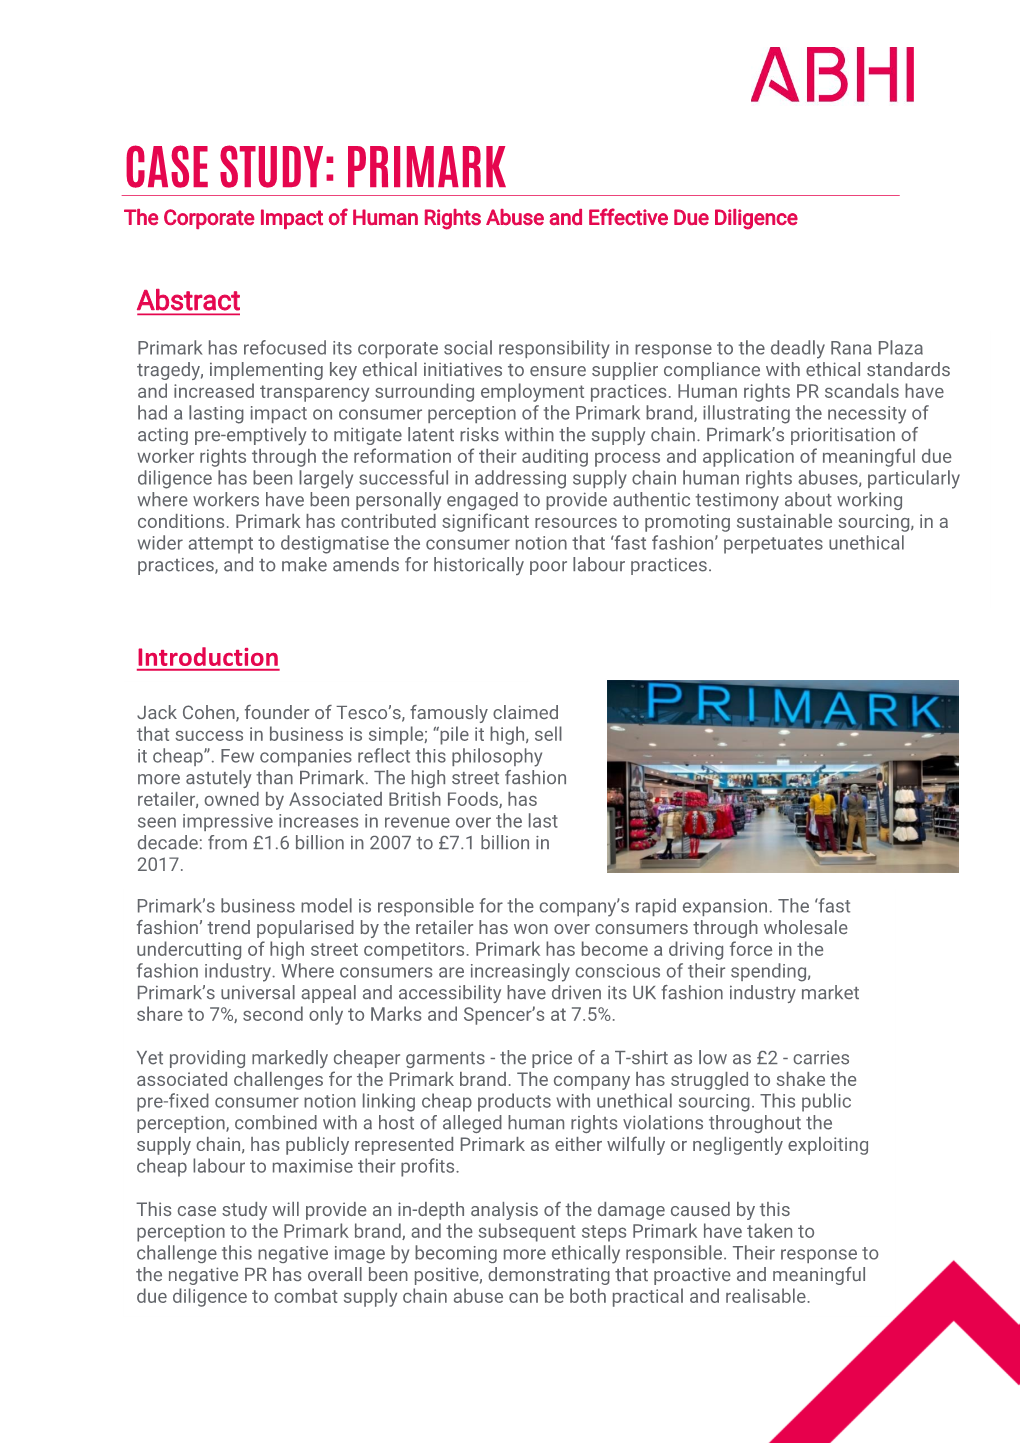 CASE STUDY: PRIMARK the Corporate Impact of Human Rights Abuse and Effective Due Diligence